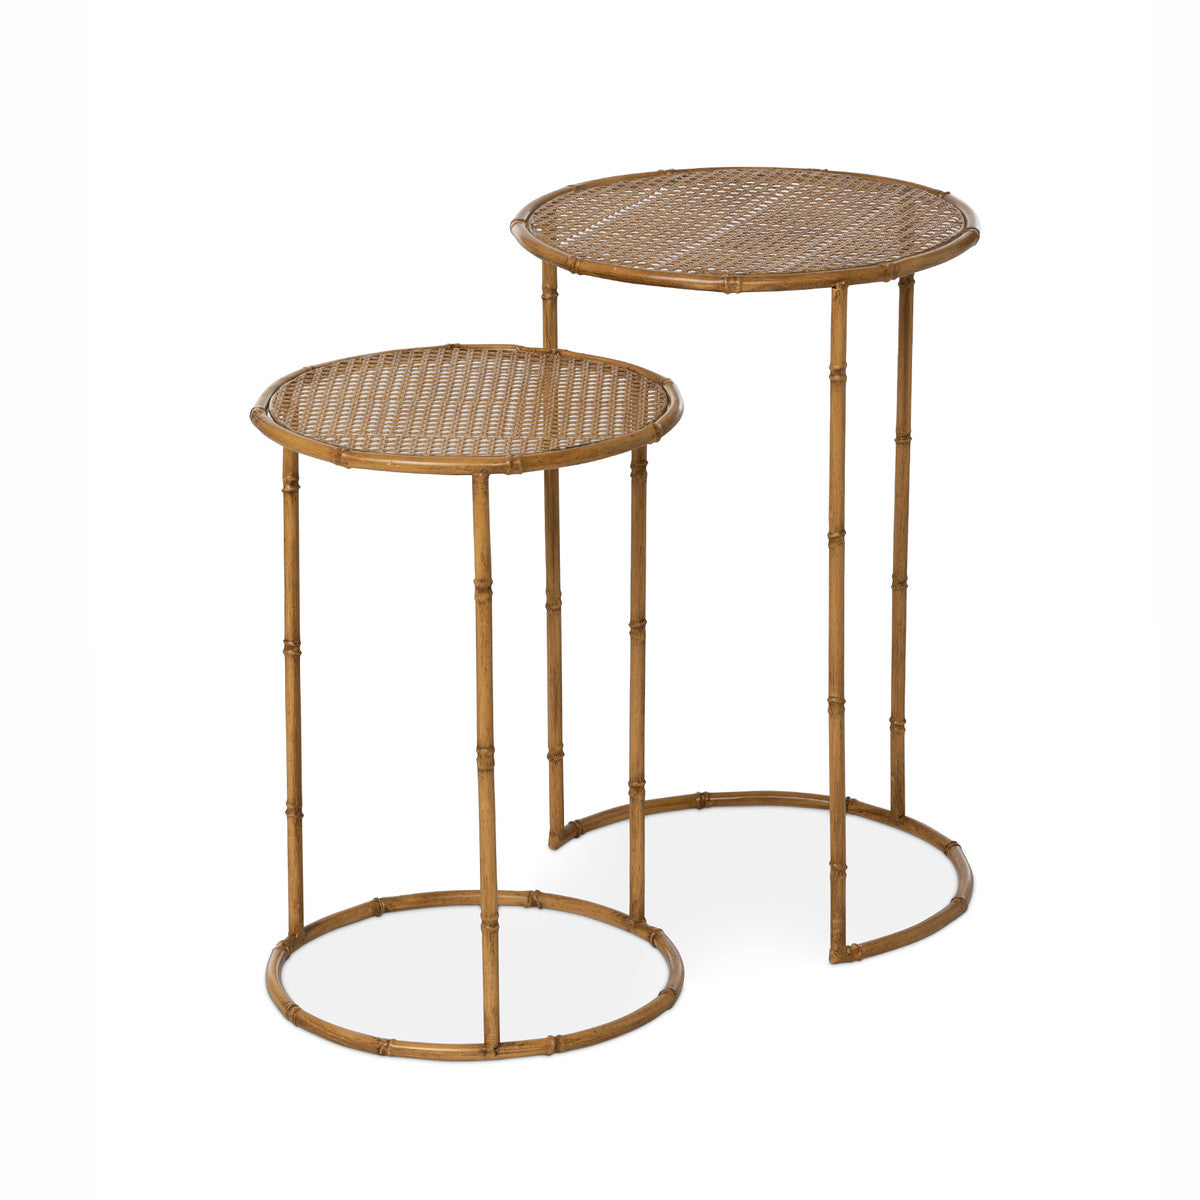 Set of 2 Roanoke Metal Occasional Nesting Tables